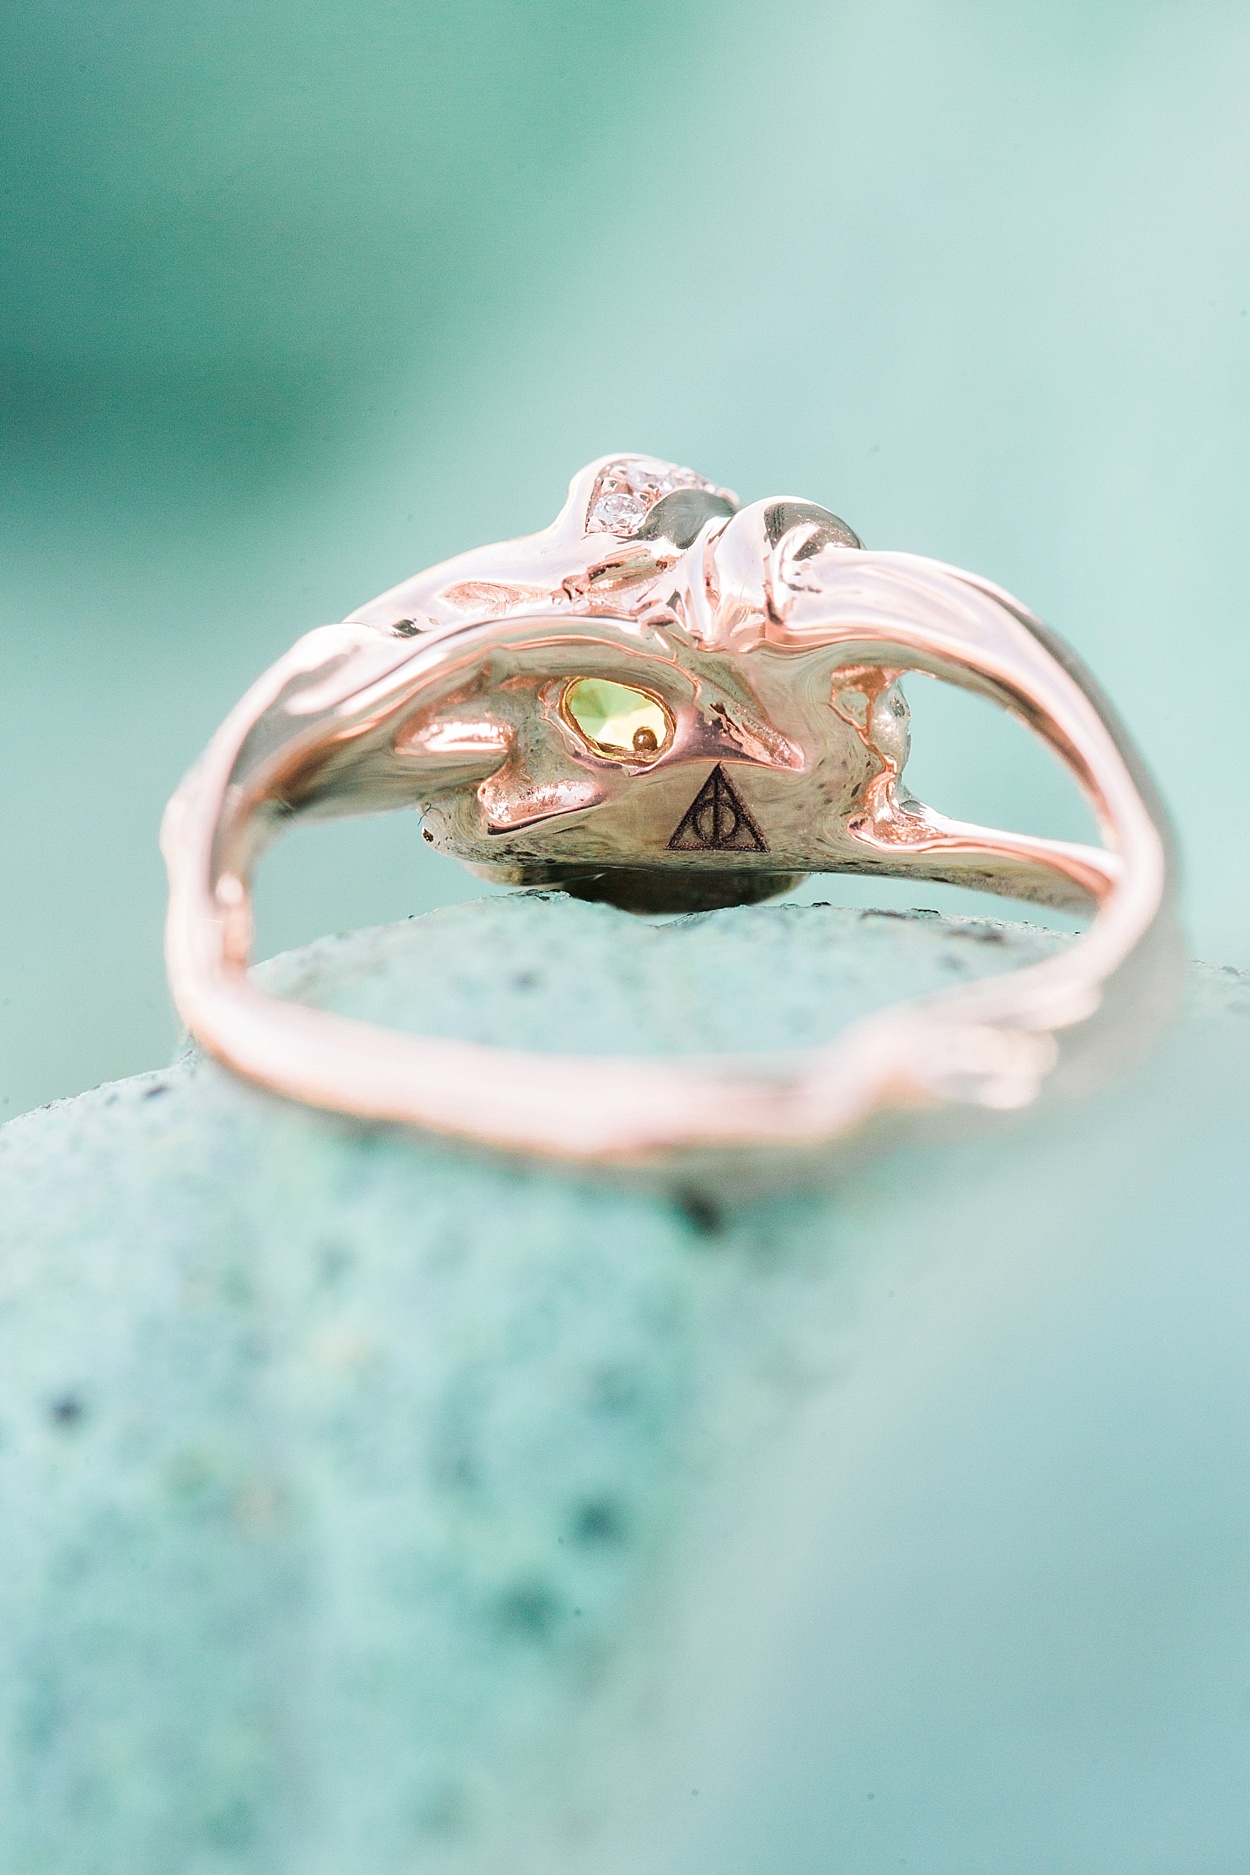 Harry Potter Deathly Hallows engagement ring | Abby Grace Photography